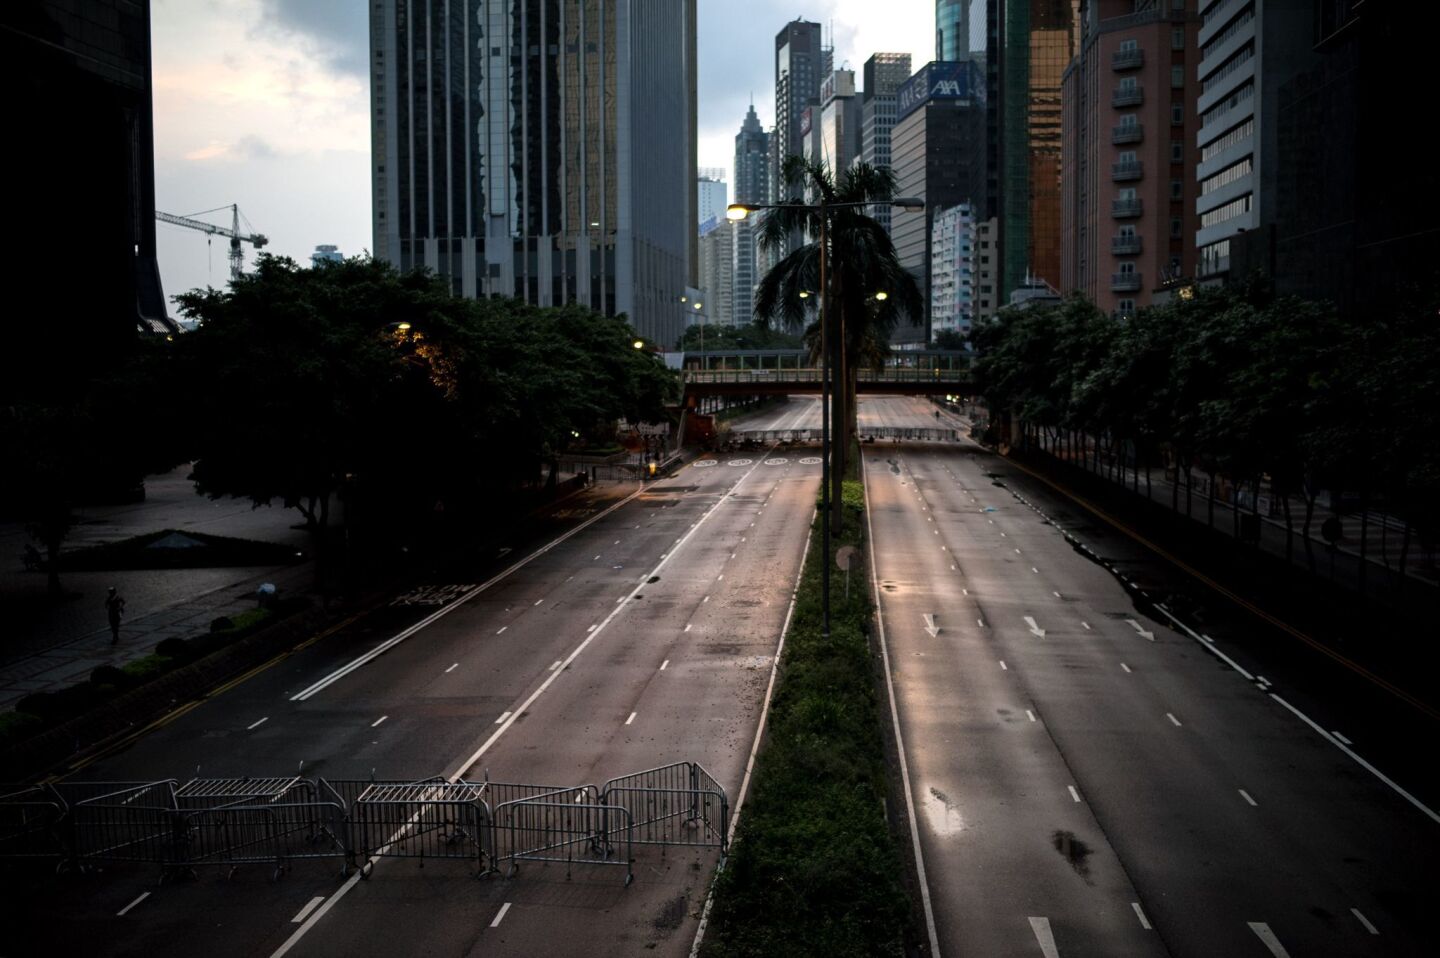 Barricades are installed to block traffic on a multilane highway as pro-democracy protests take place in Hong Kong.